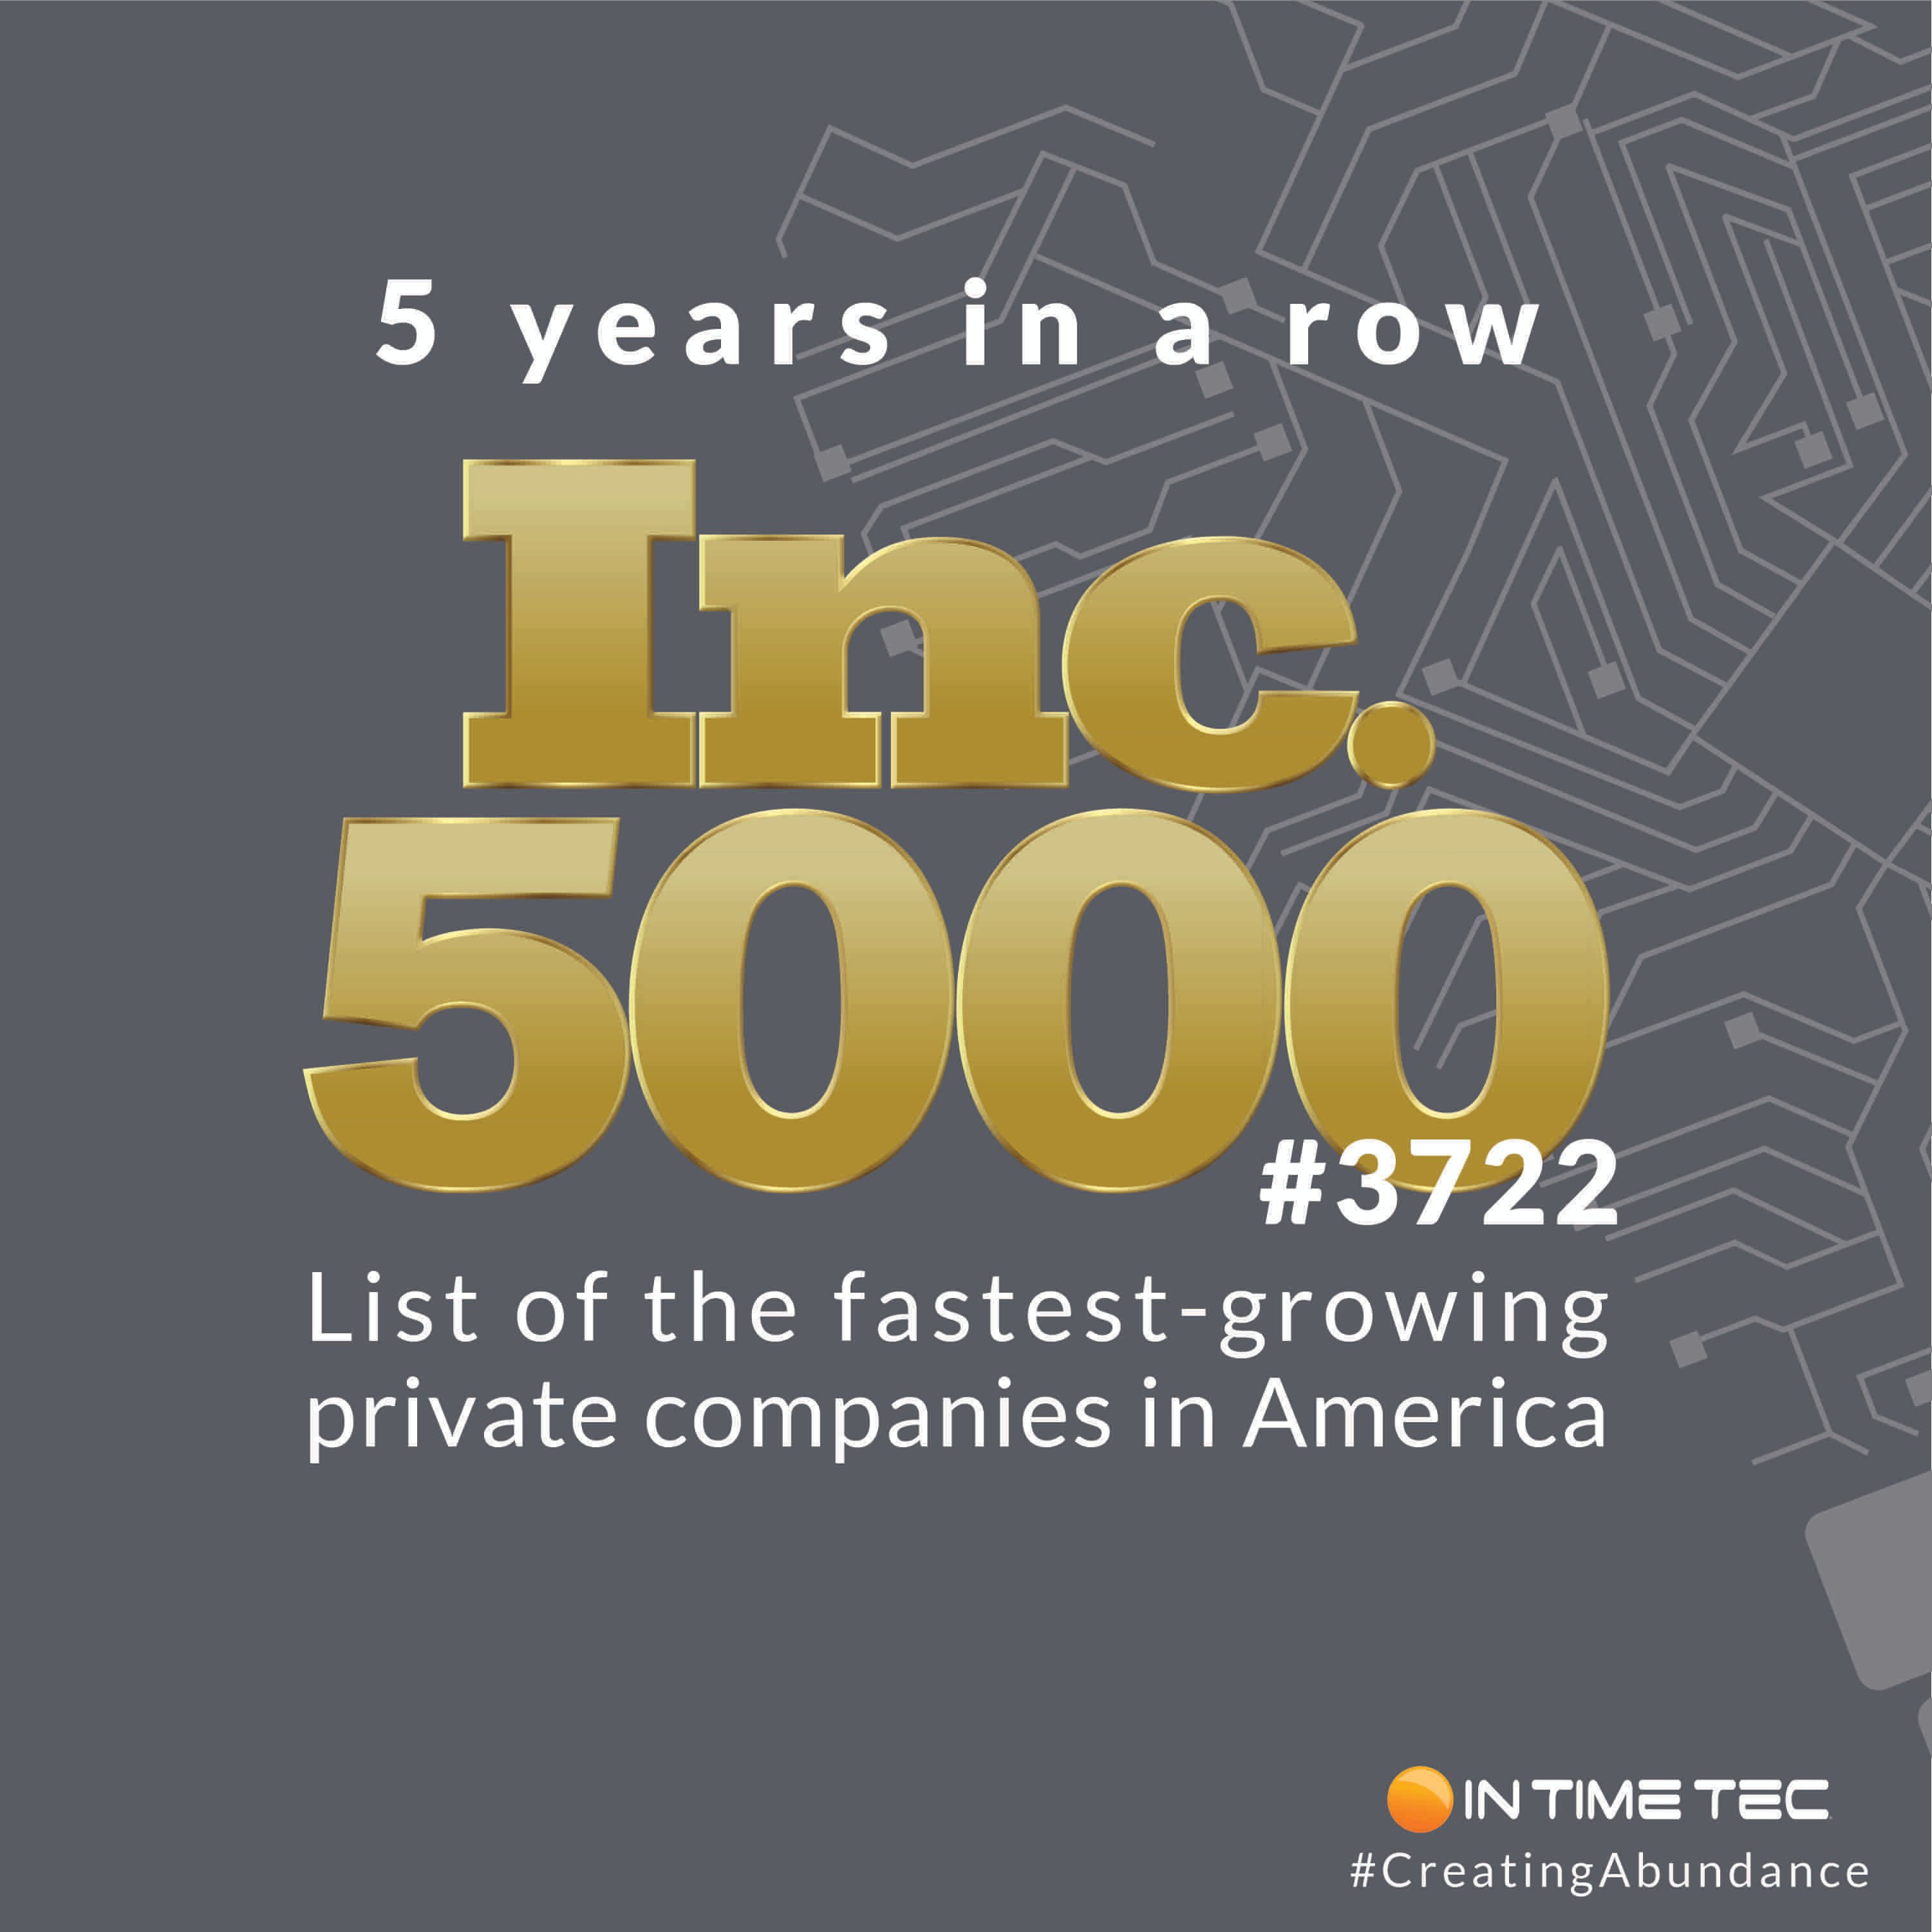 Inc 5000 logo and In Time Tec's ranking: 3722